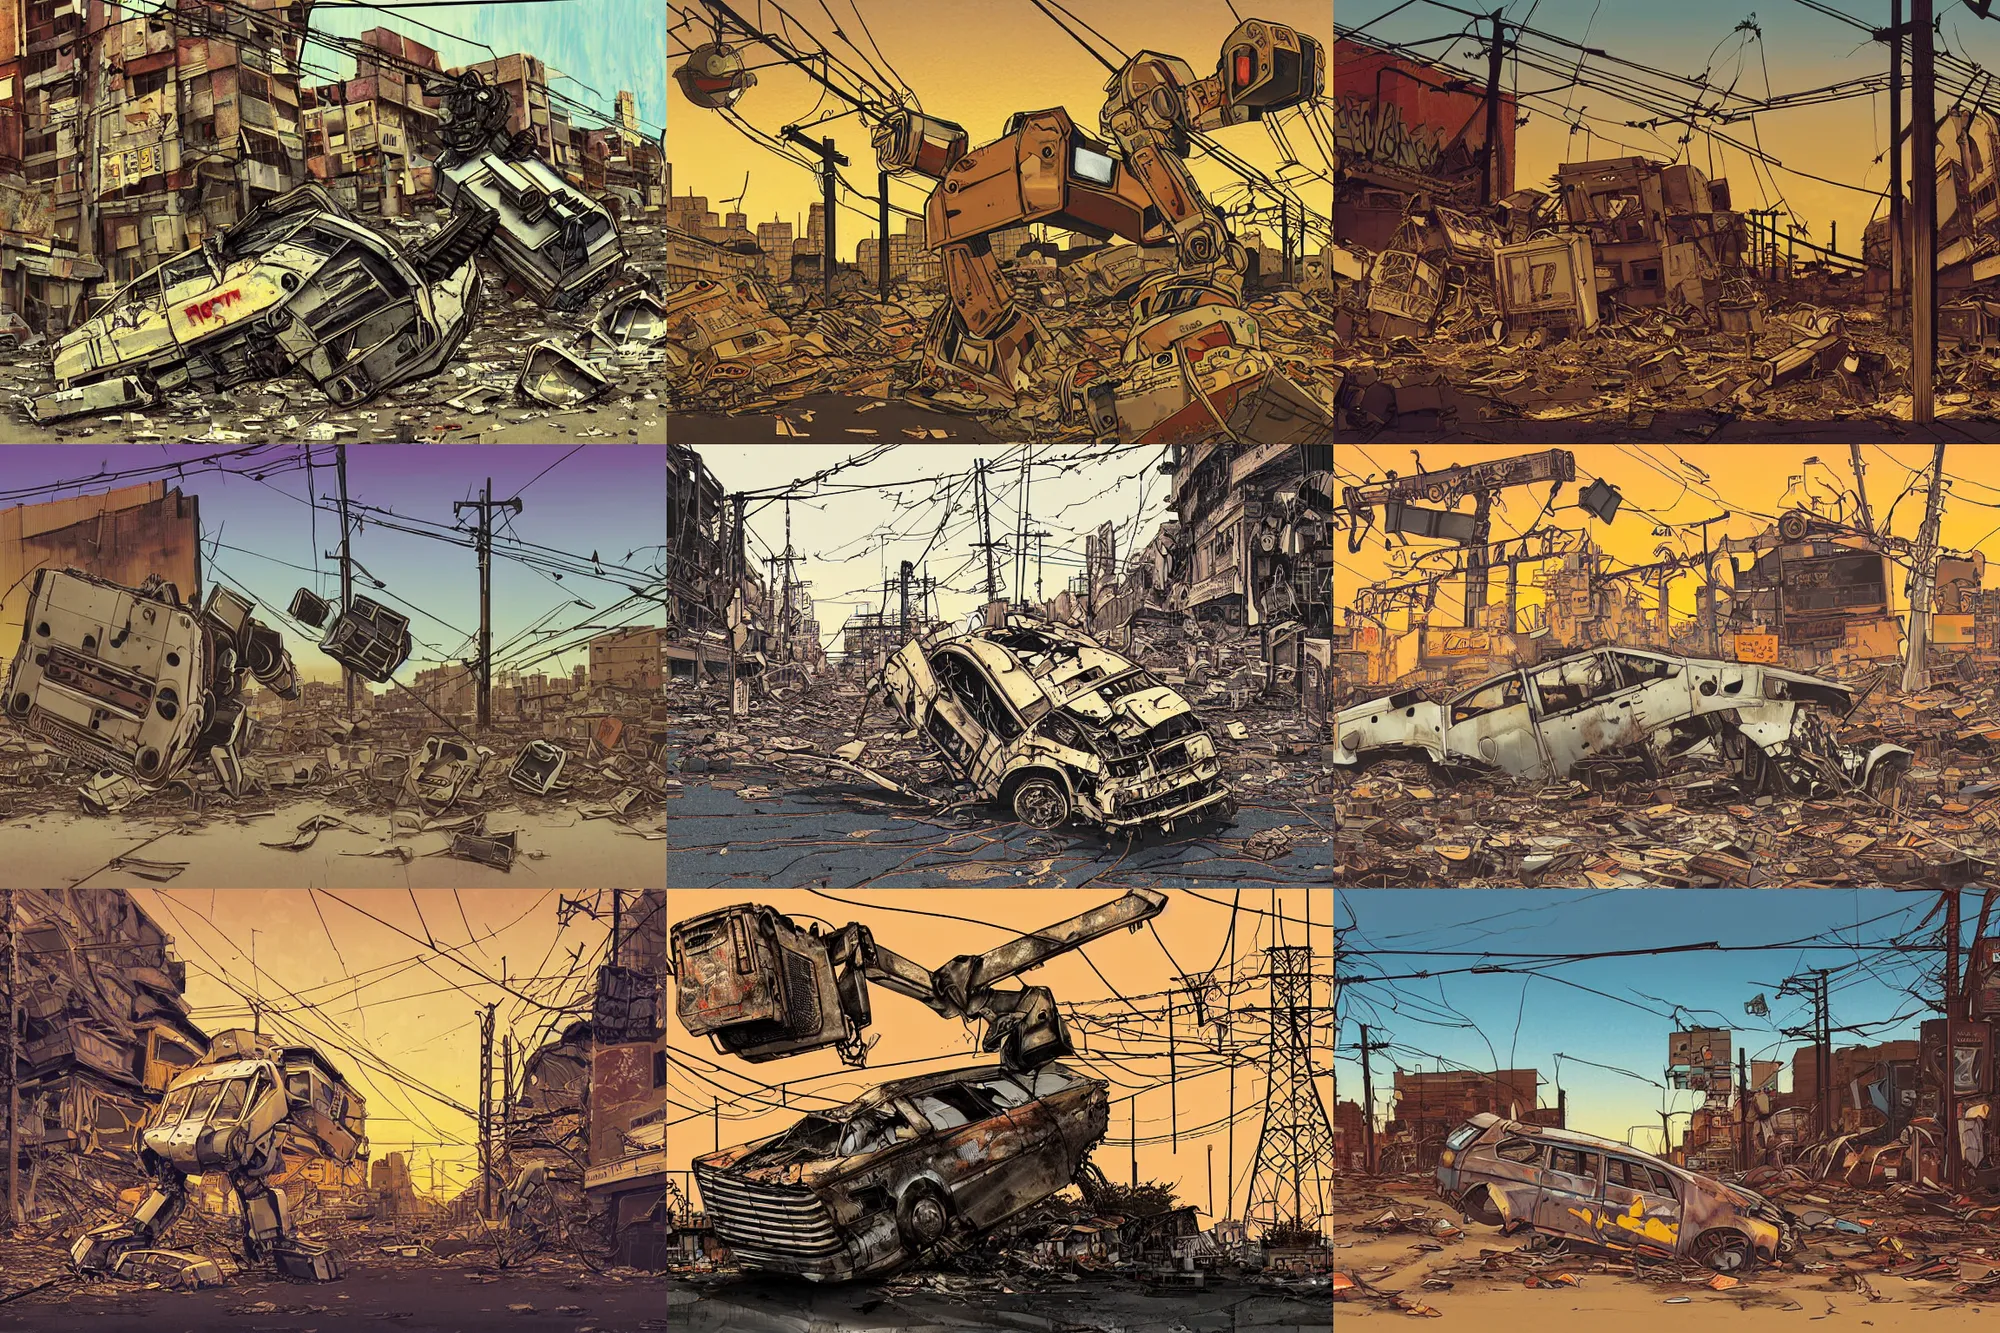 Prompt: artbook artwork, paper texture, movie scene, dead corpse rusty evangelion robot crashed in deserted dusty shinjuku junk town, tabgled overhead wires, telephone pole, old pawn shop, broken tv, harsh shadows, golden hour, dusty, pencil lines, pale yellow sky, bold graffiti